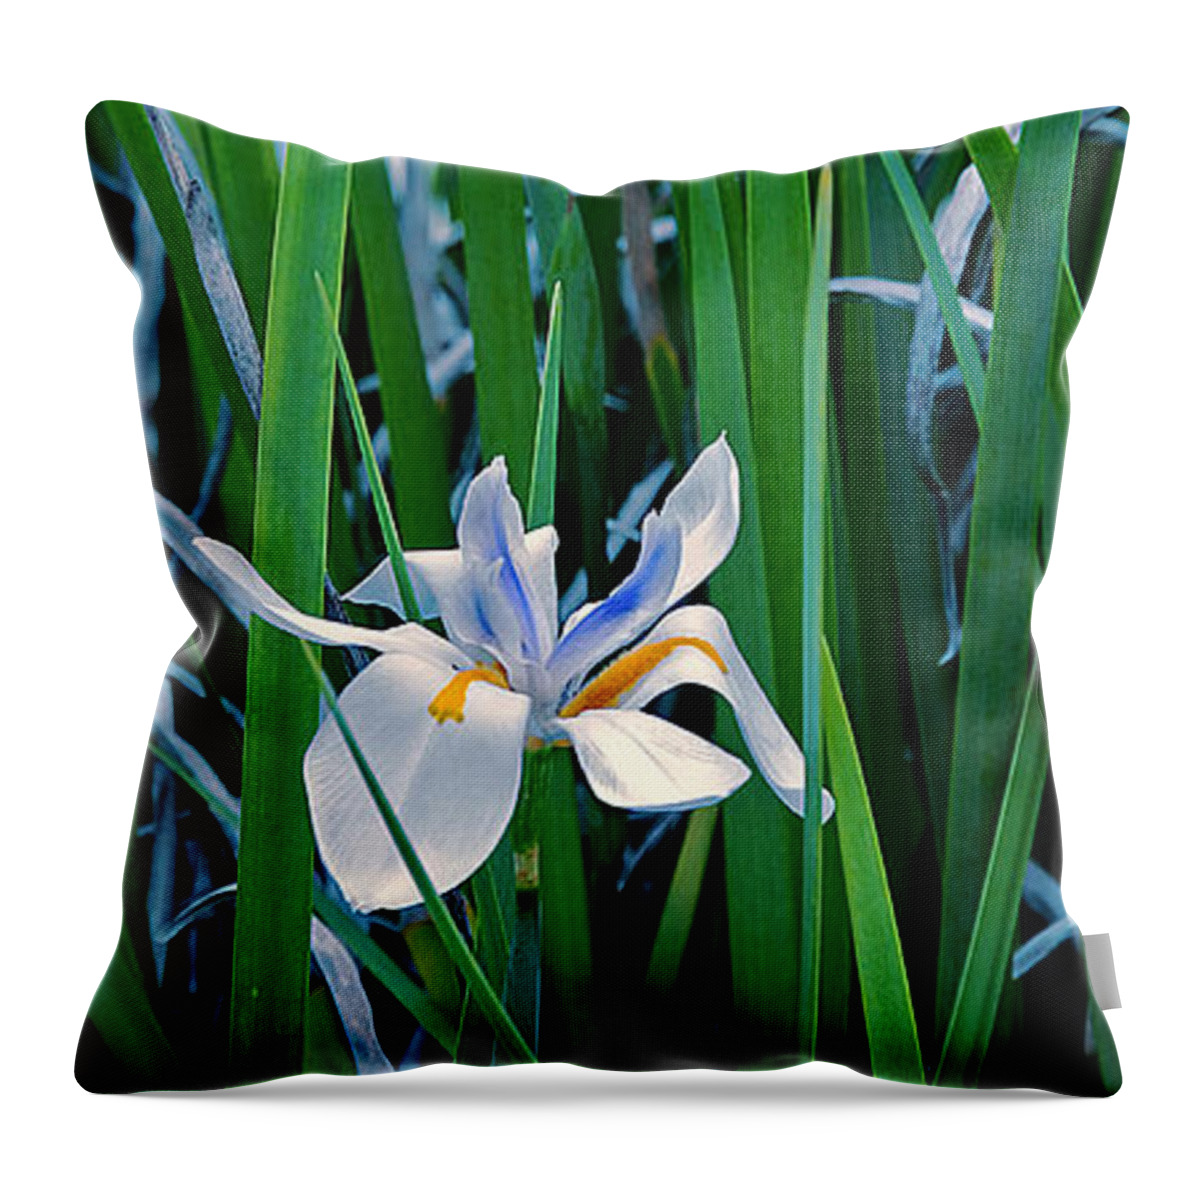 Lily Throw Pillow featuring the photograph Morning Smile - Wild African Iris by Donna Proctor